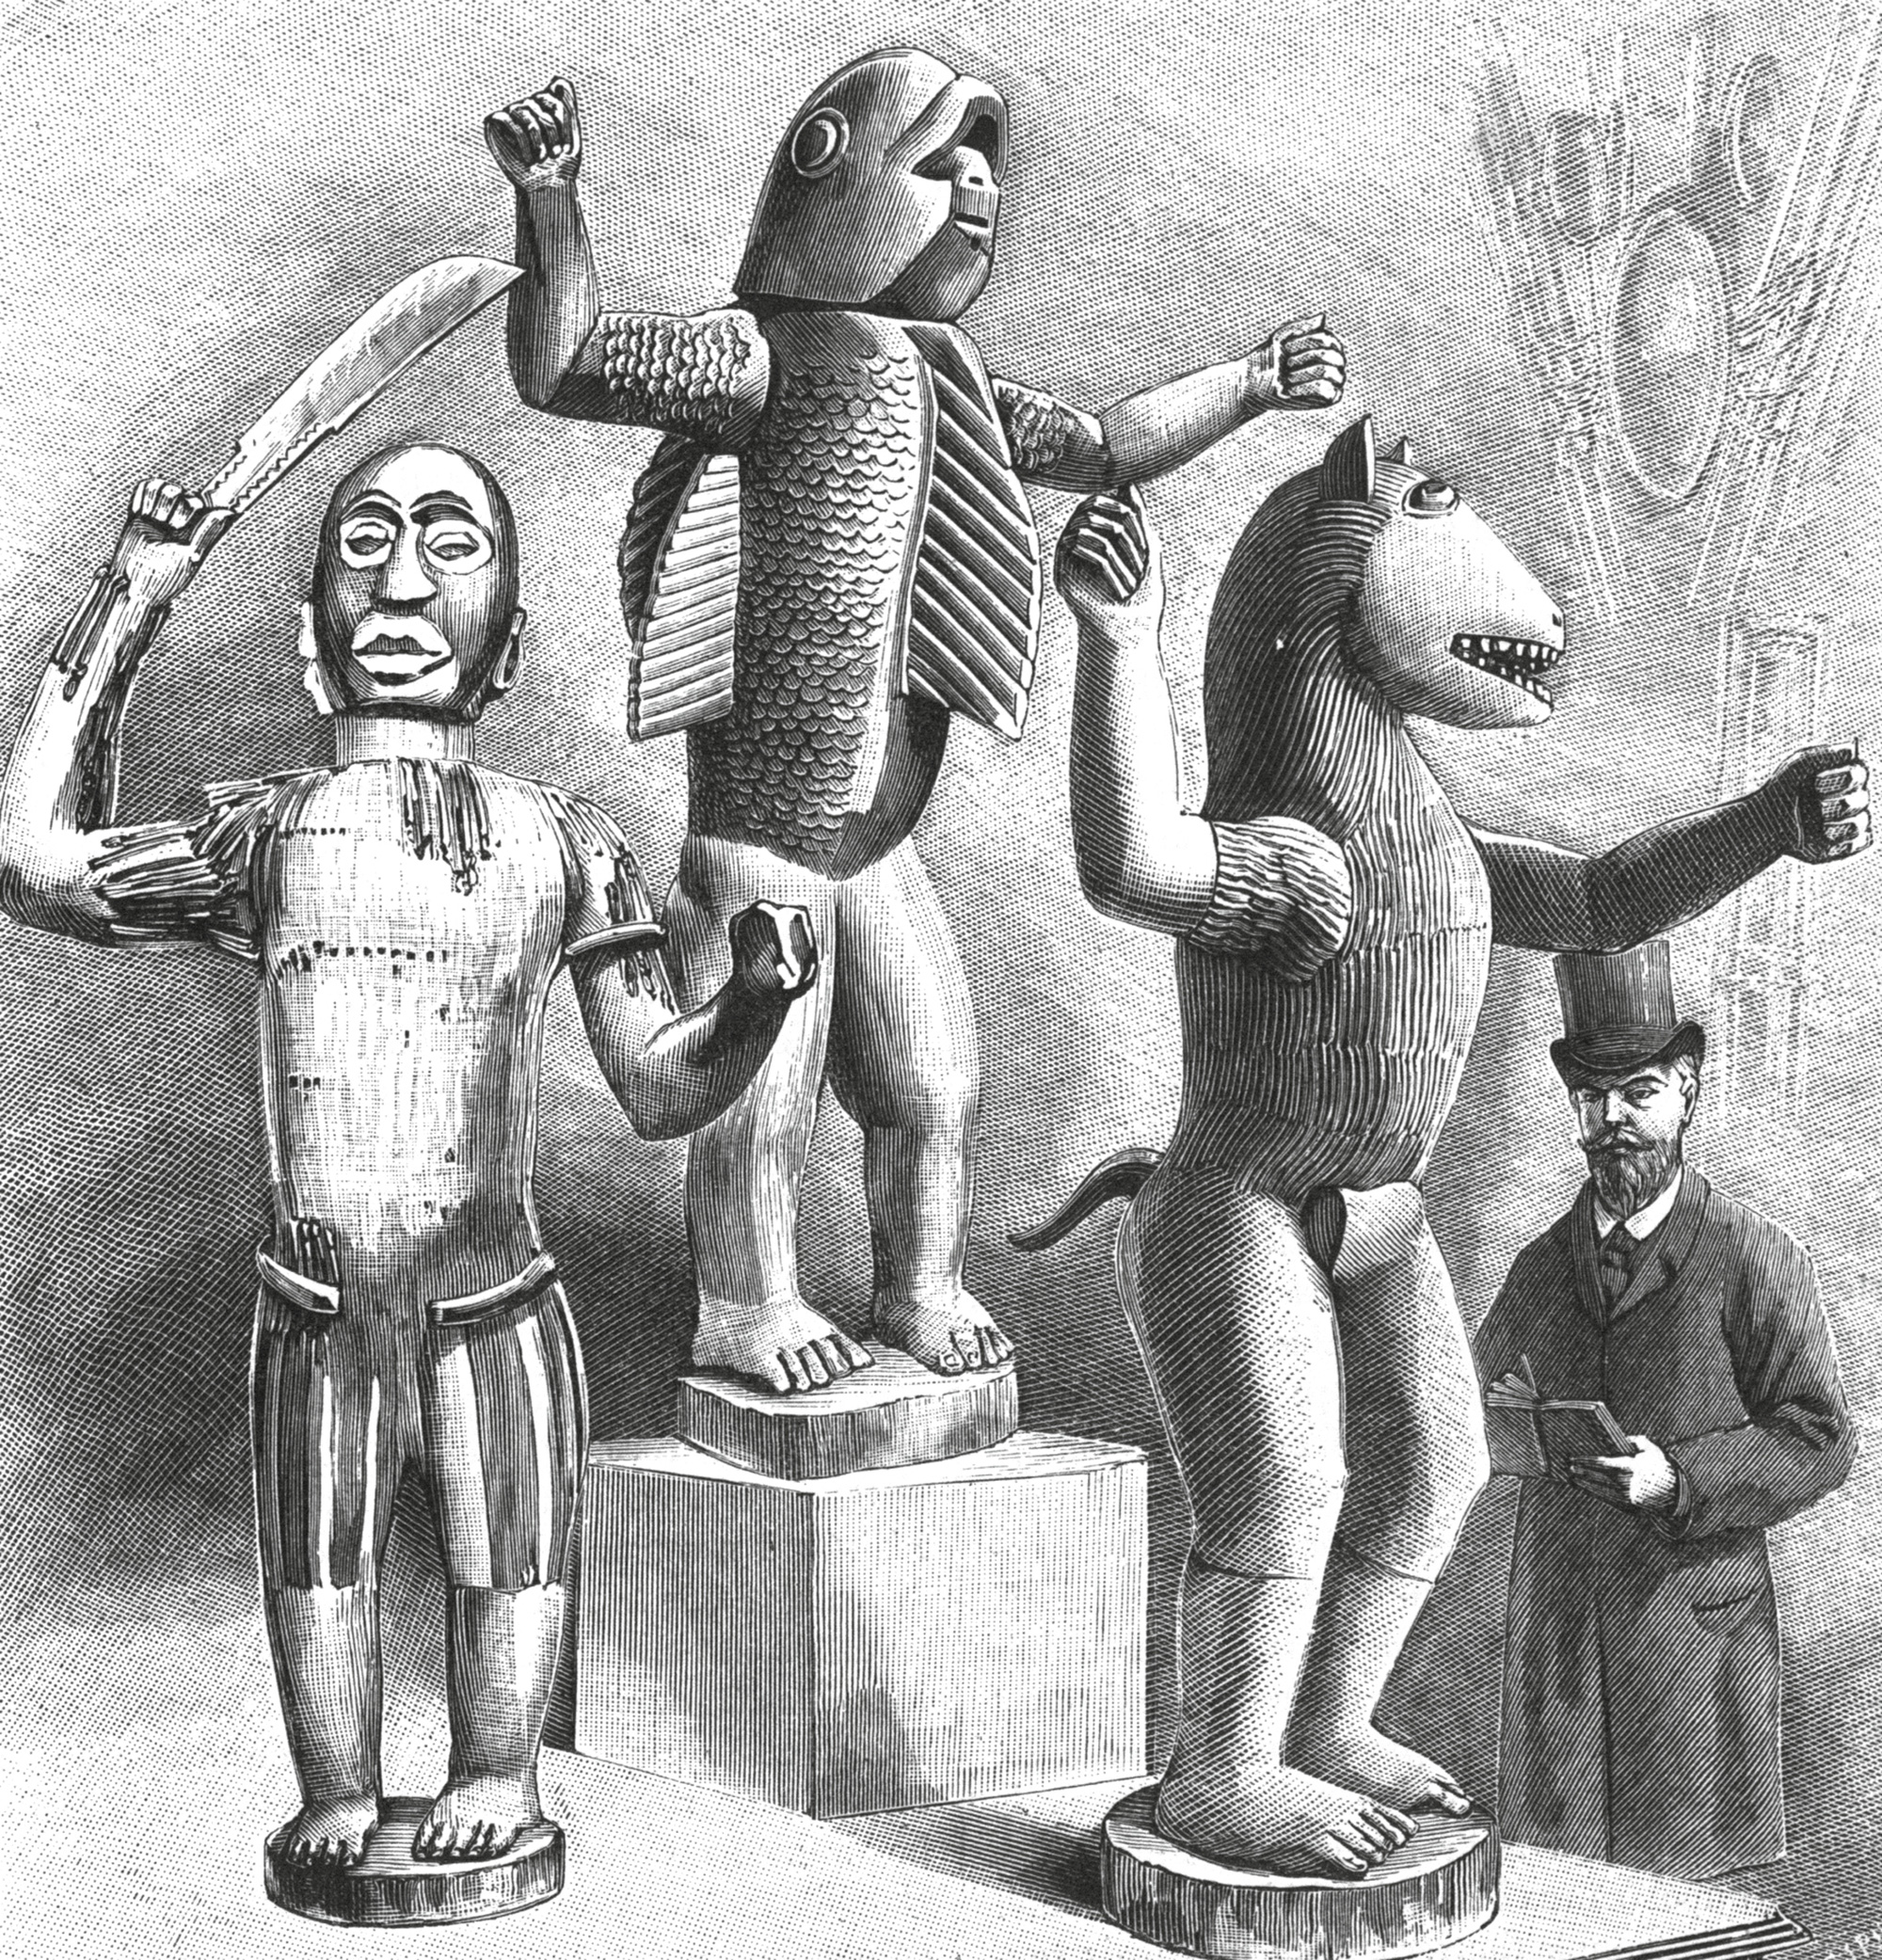 An Illustration of Bocio depicting the Dahomean kings Guezo, Glele, and Béhanzin exhibited in Paris at the Musée d’Ethnographie du Trocadéro. Illustration from “La Nature,” volume 22, number 1086, eighteen ninety-four.